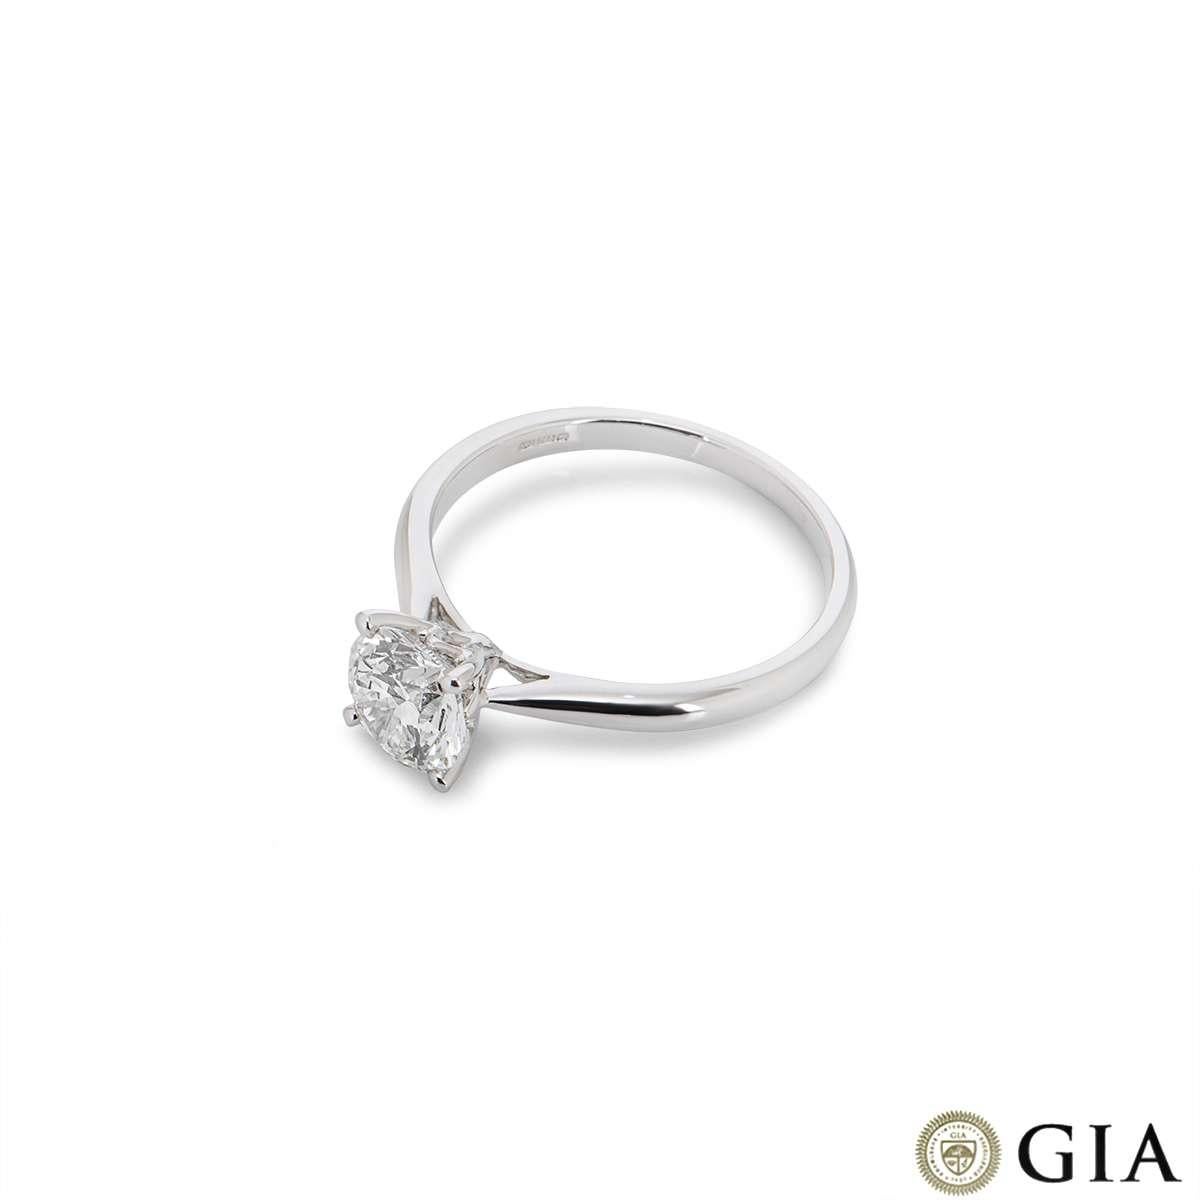 GIA Certified White Gold Round Brilliant Cut Diamond Ring 1.15ct F/VS1 XXX In New Condition For Sale In London, GB